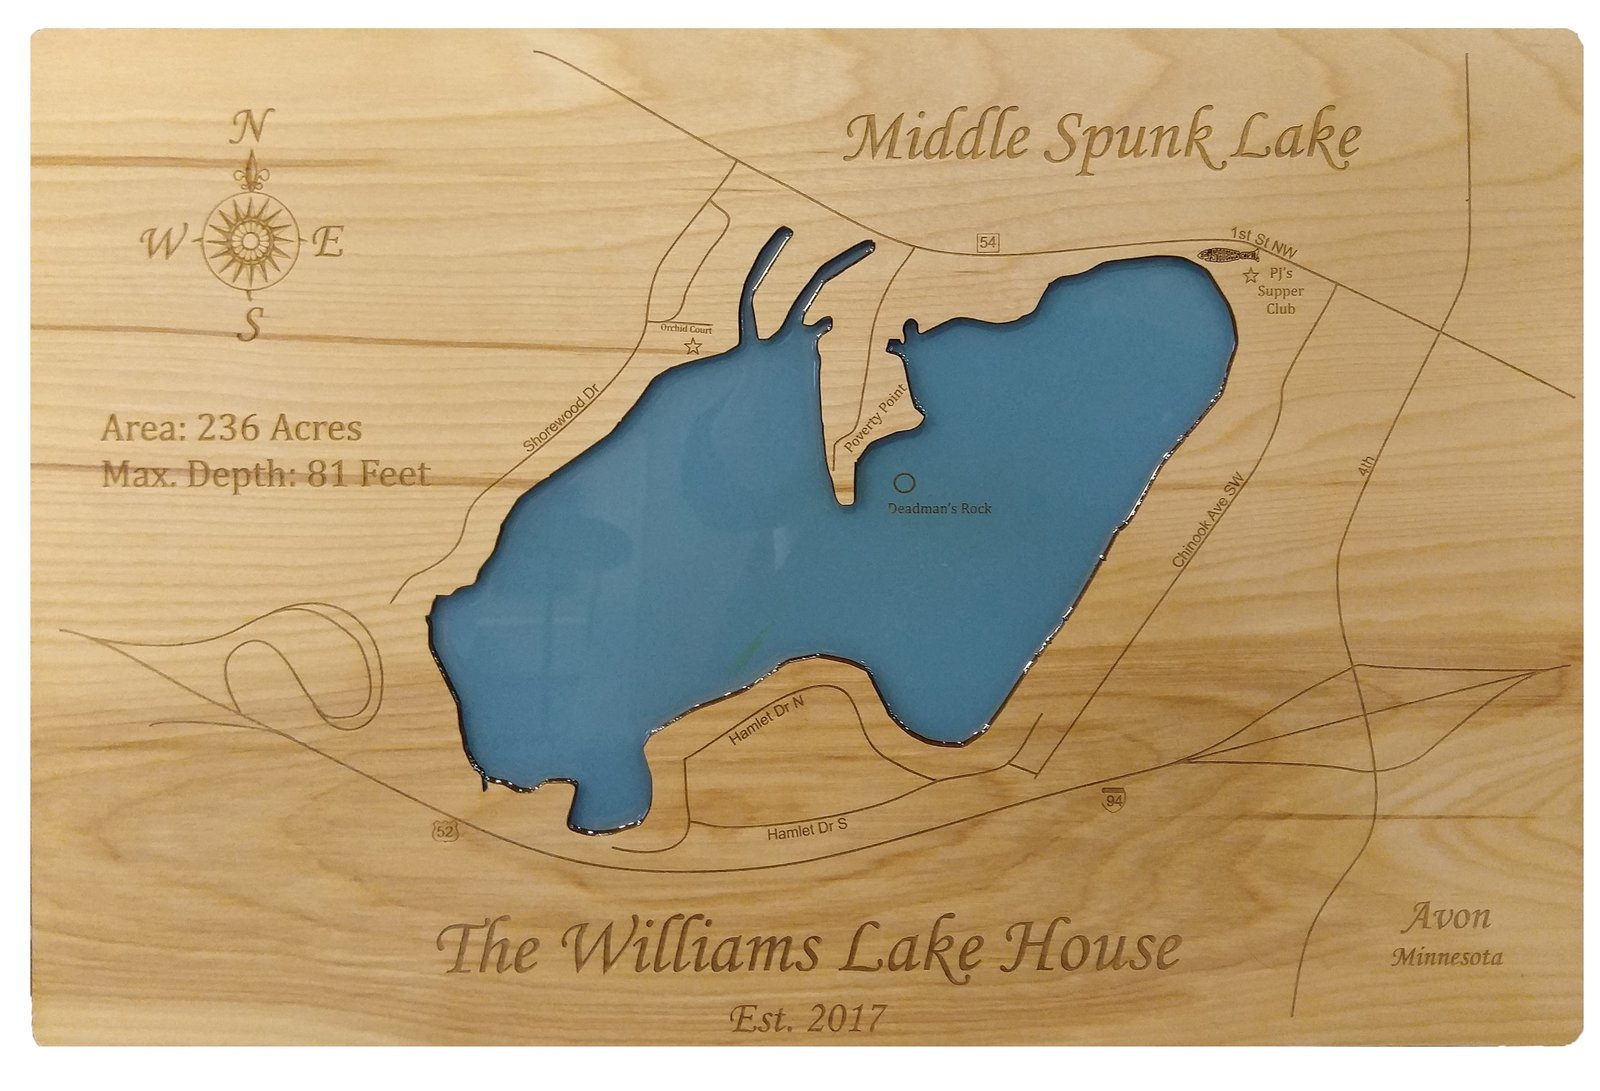 Primary image for Middle Spunk Lake, Minnesota - Laser Cut Wood Map